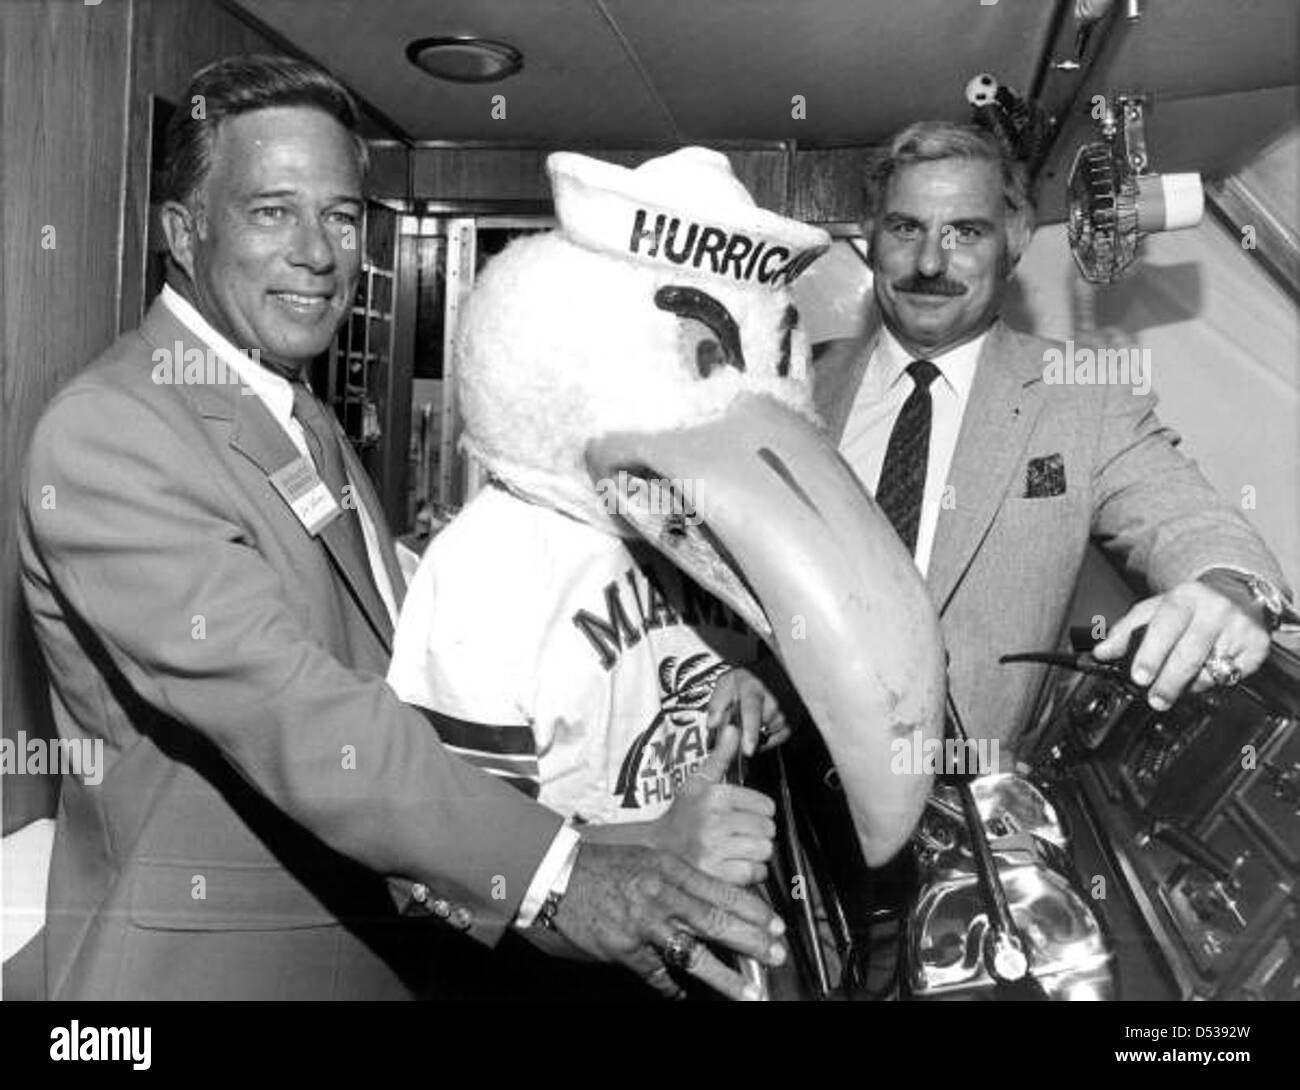 University of Miami head football coach Howard Schnellenberger, right, posing with Don Works and the school mascot for group portrait: Fort Lauderdale, Florida Stock Photo